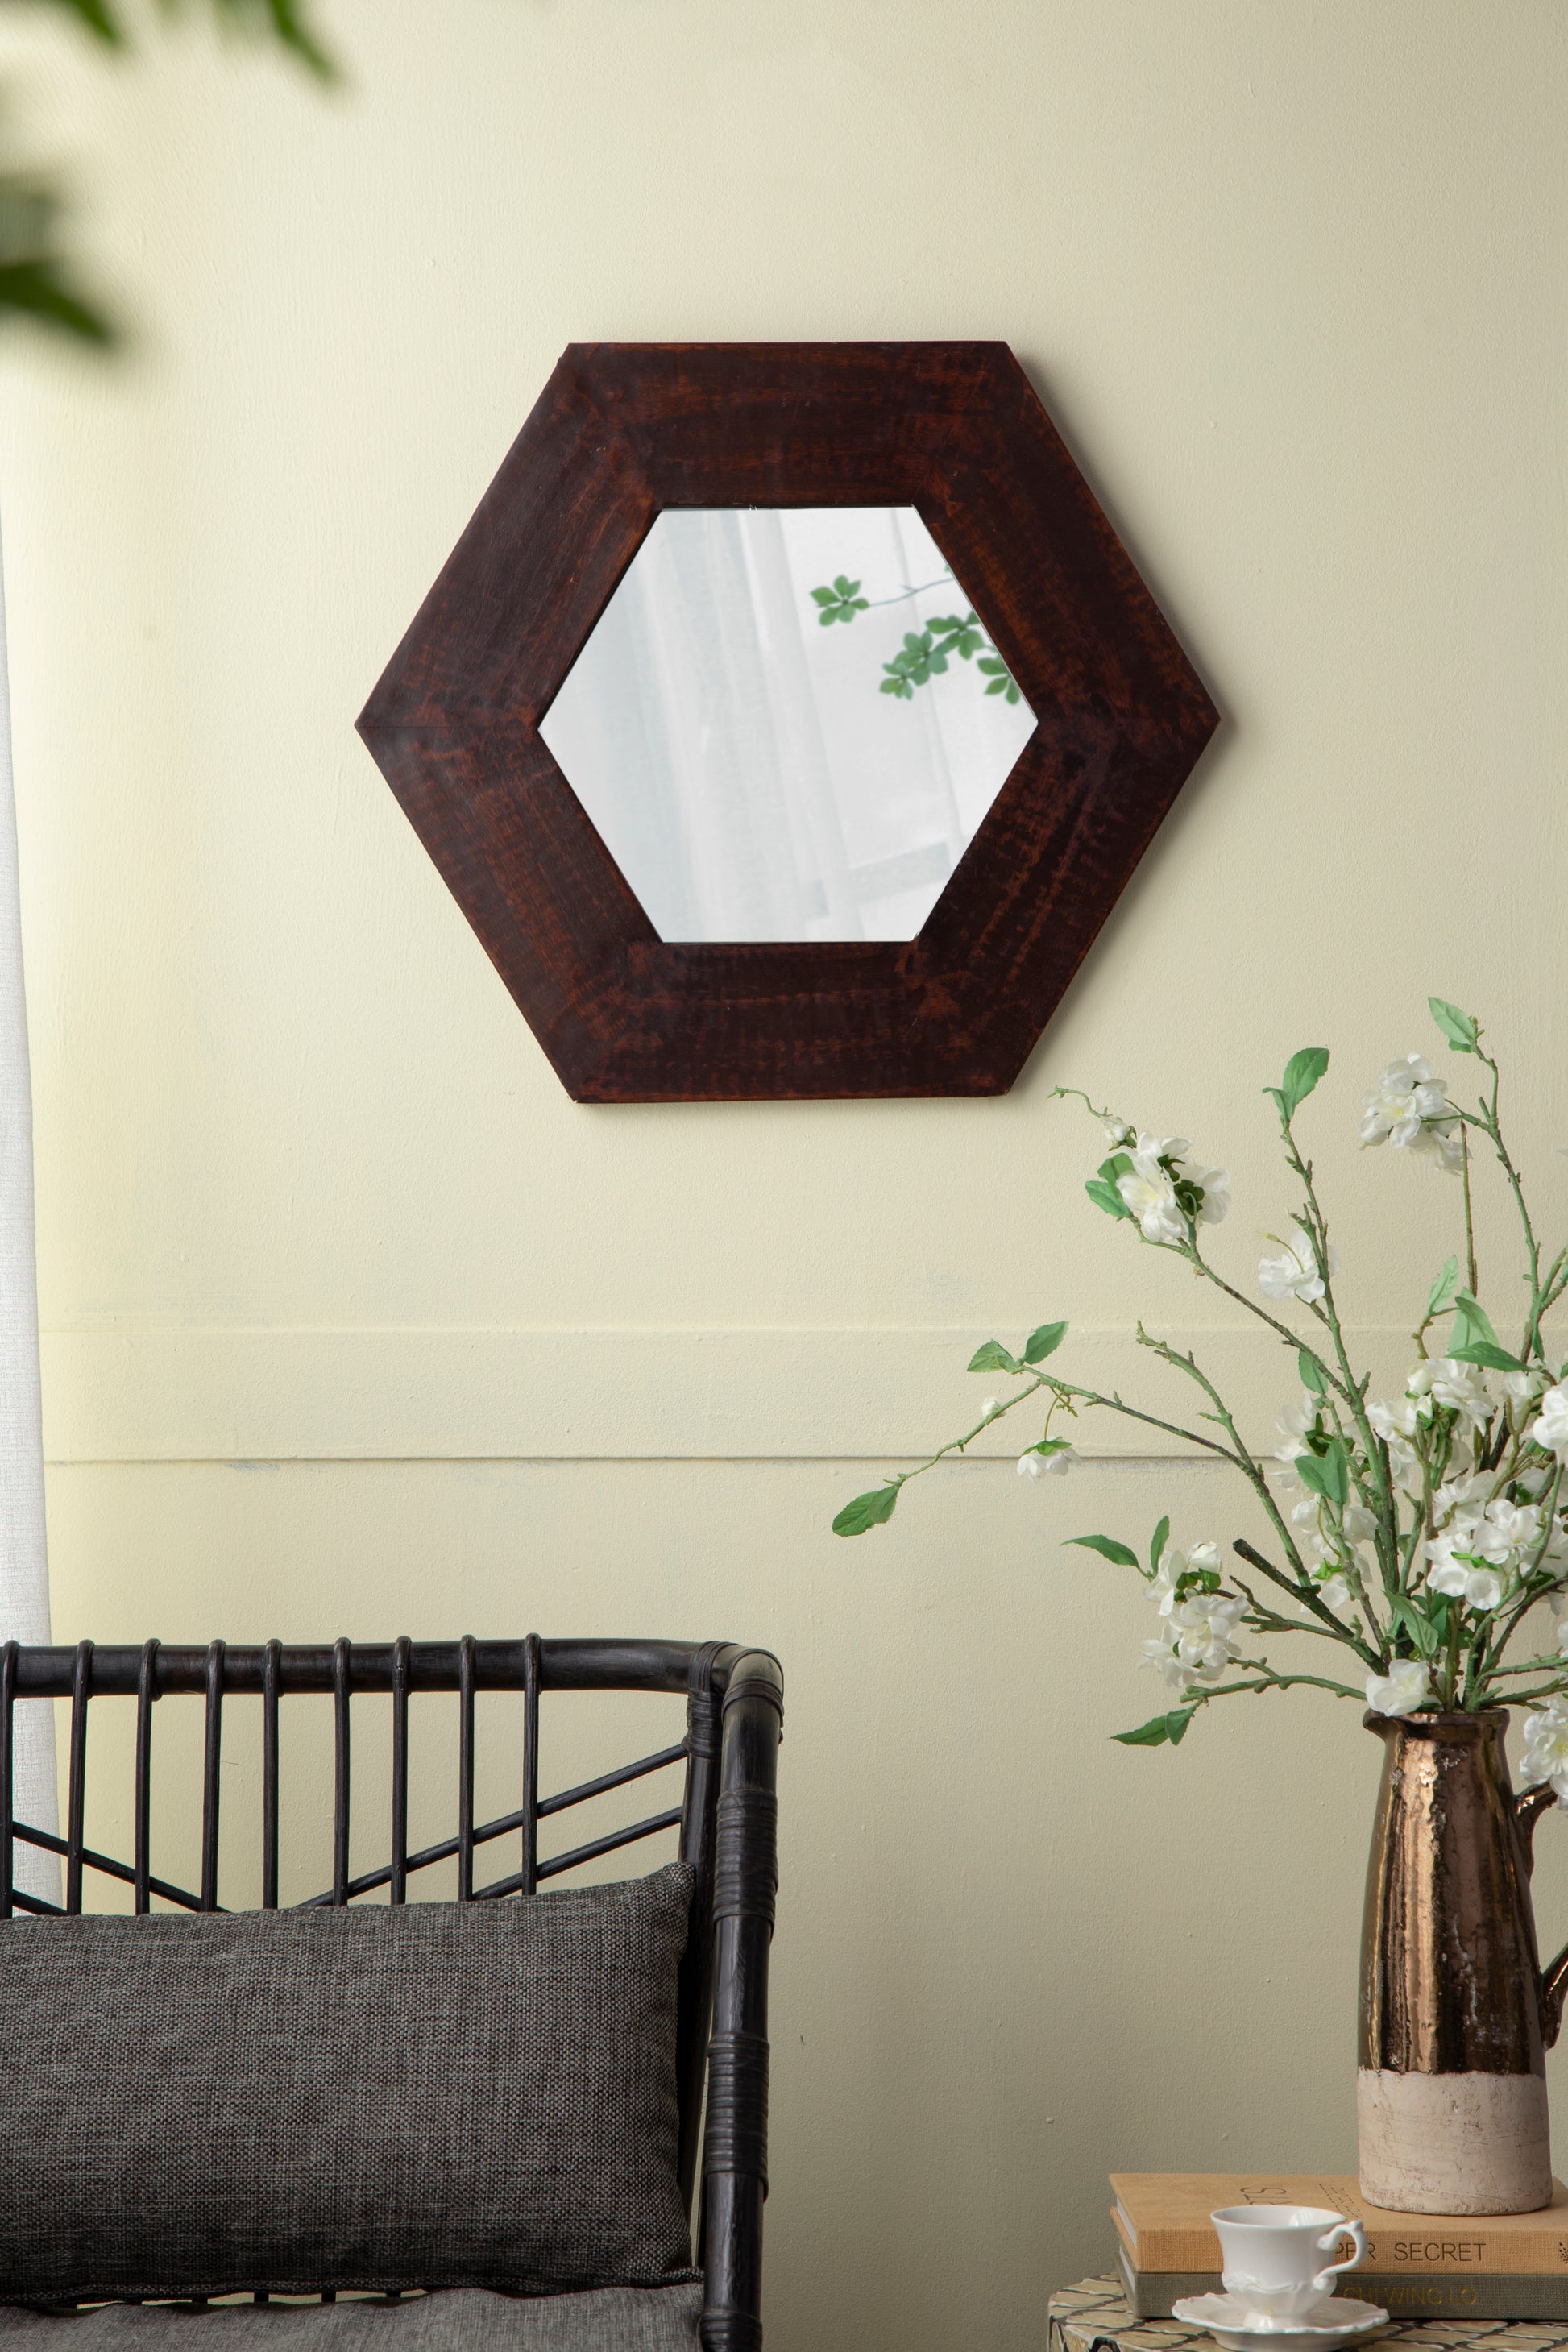 18.5" x 18.5" Hexagon Mirror with Solid Wood Frame brown-wood+glass